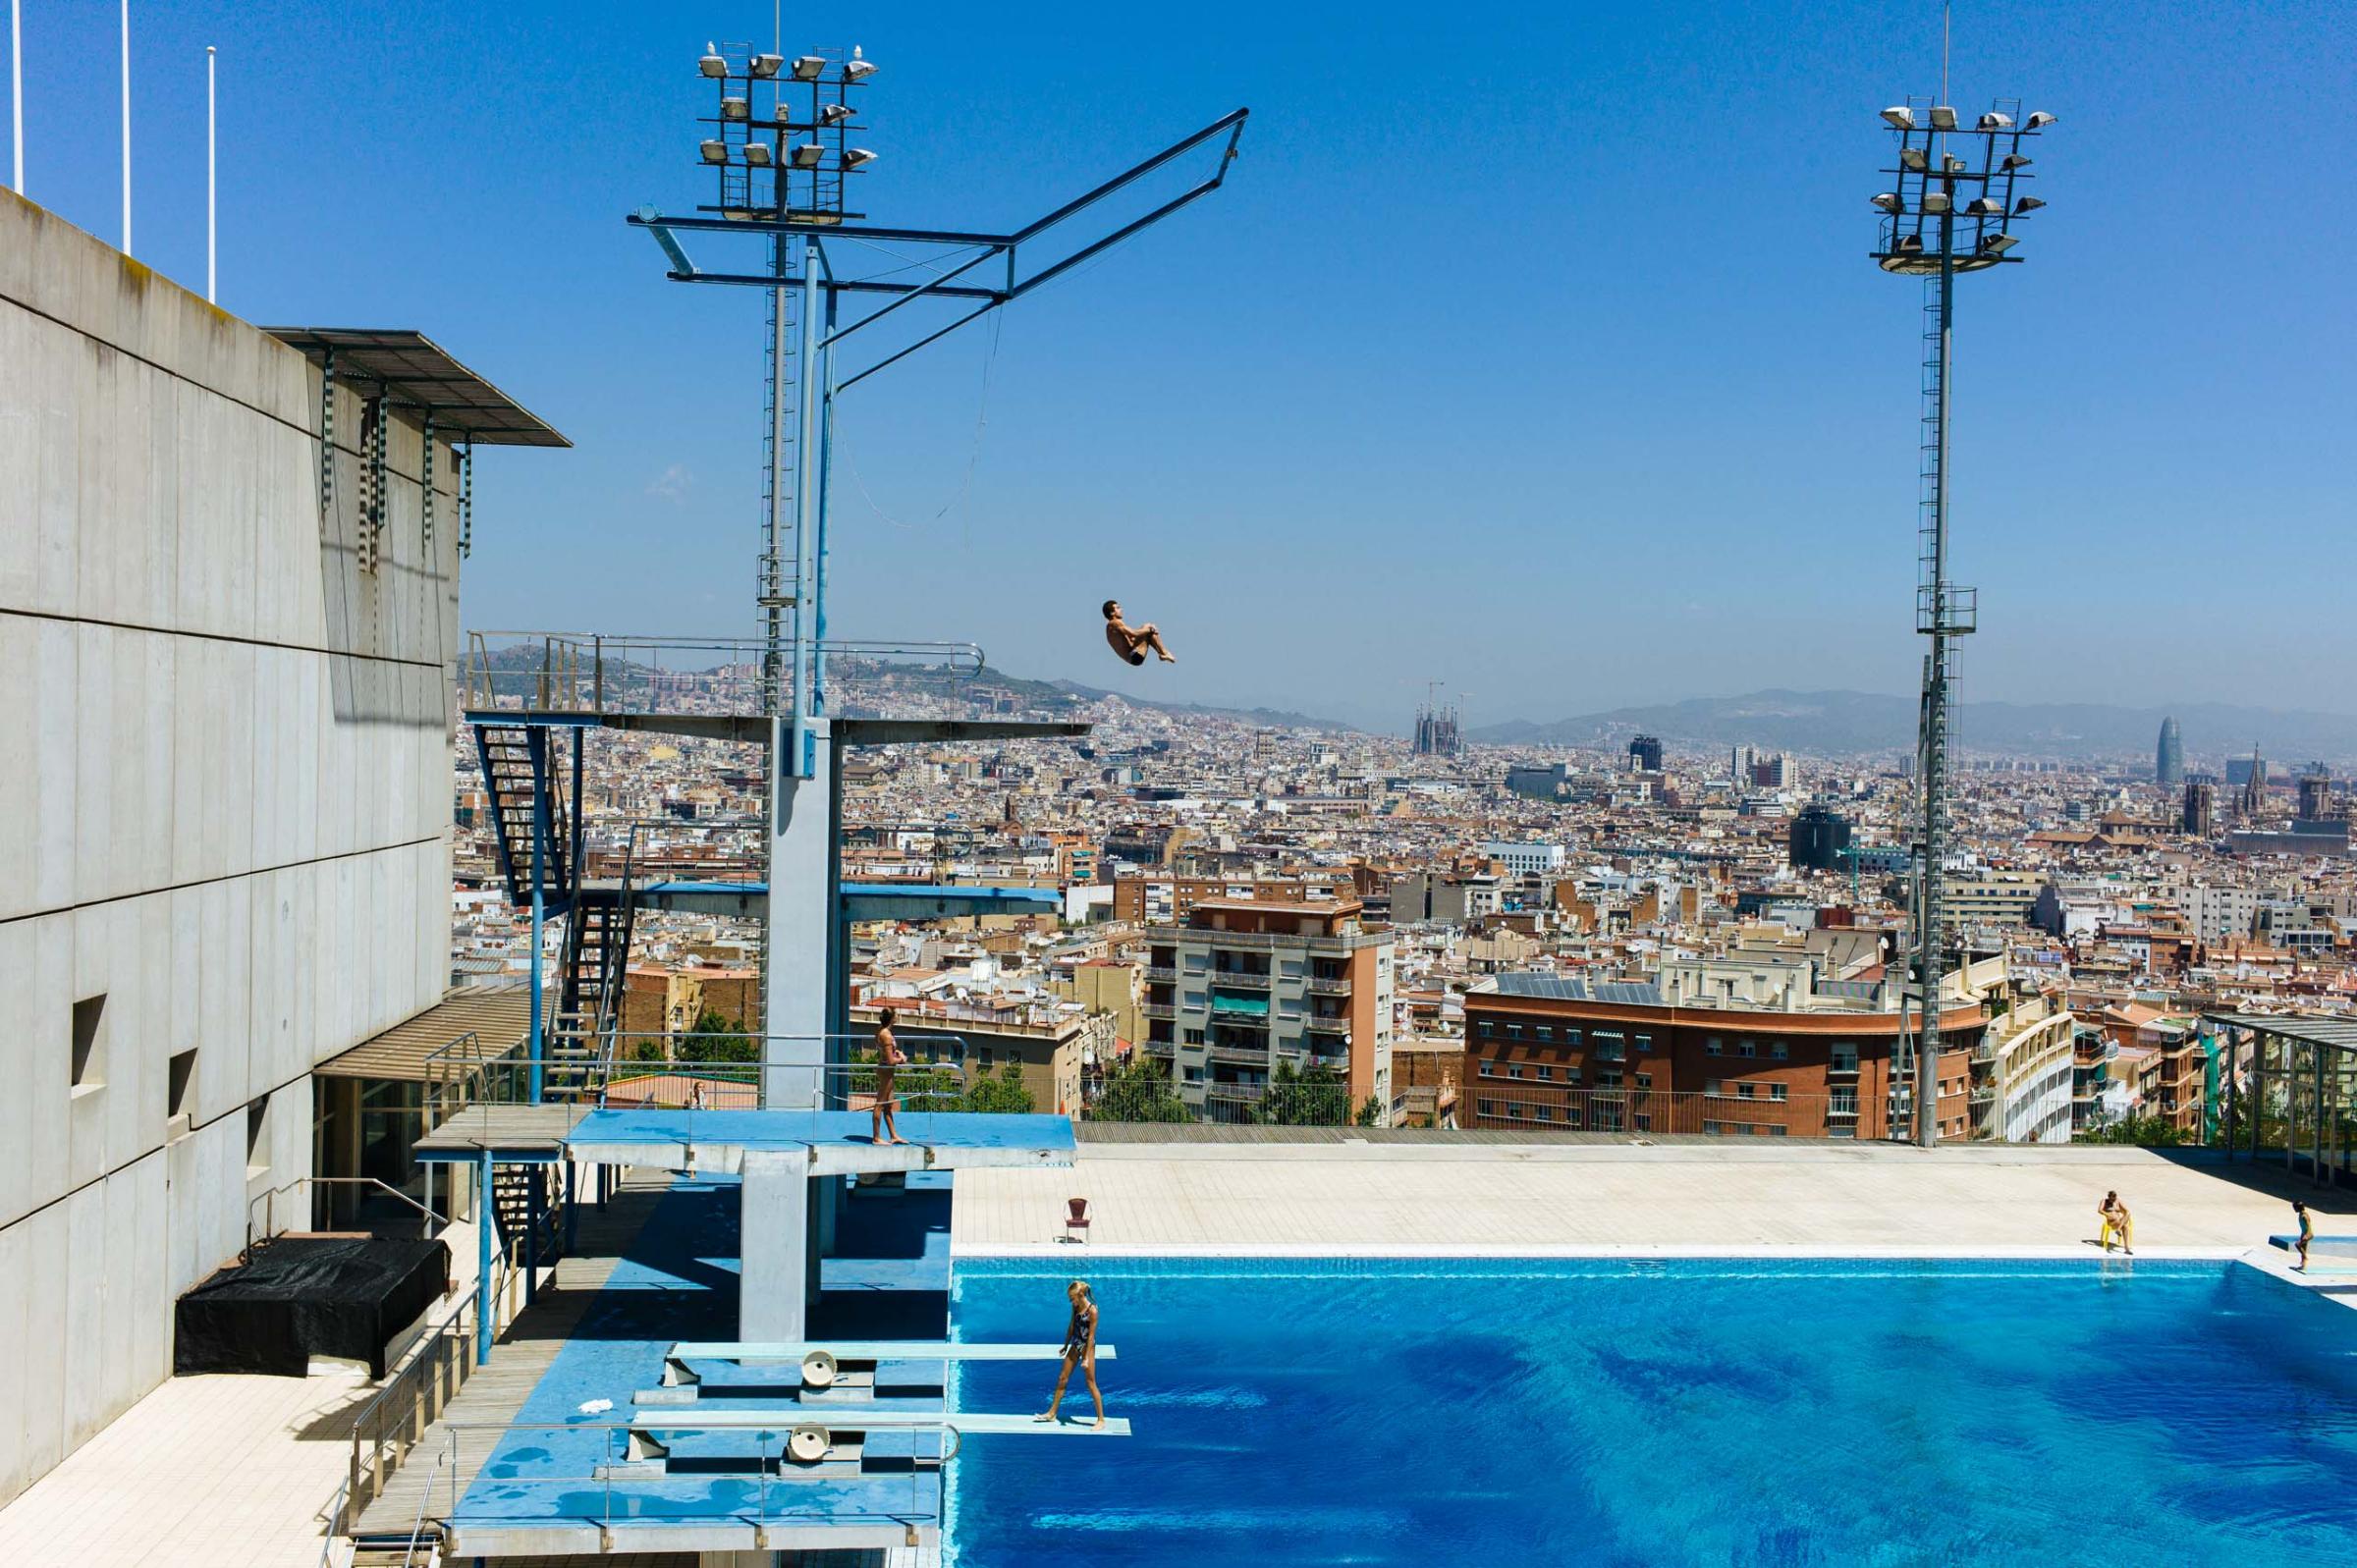 A view of the diving pool on Montjuïc hill overlooking Barcelona, host of the 1992 Summer Olympics, photographed in July 2012. Built decades earlier, it later hosted competitions and allowed public access.